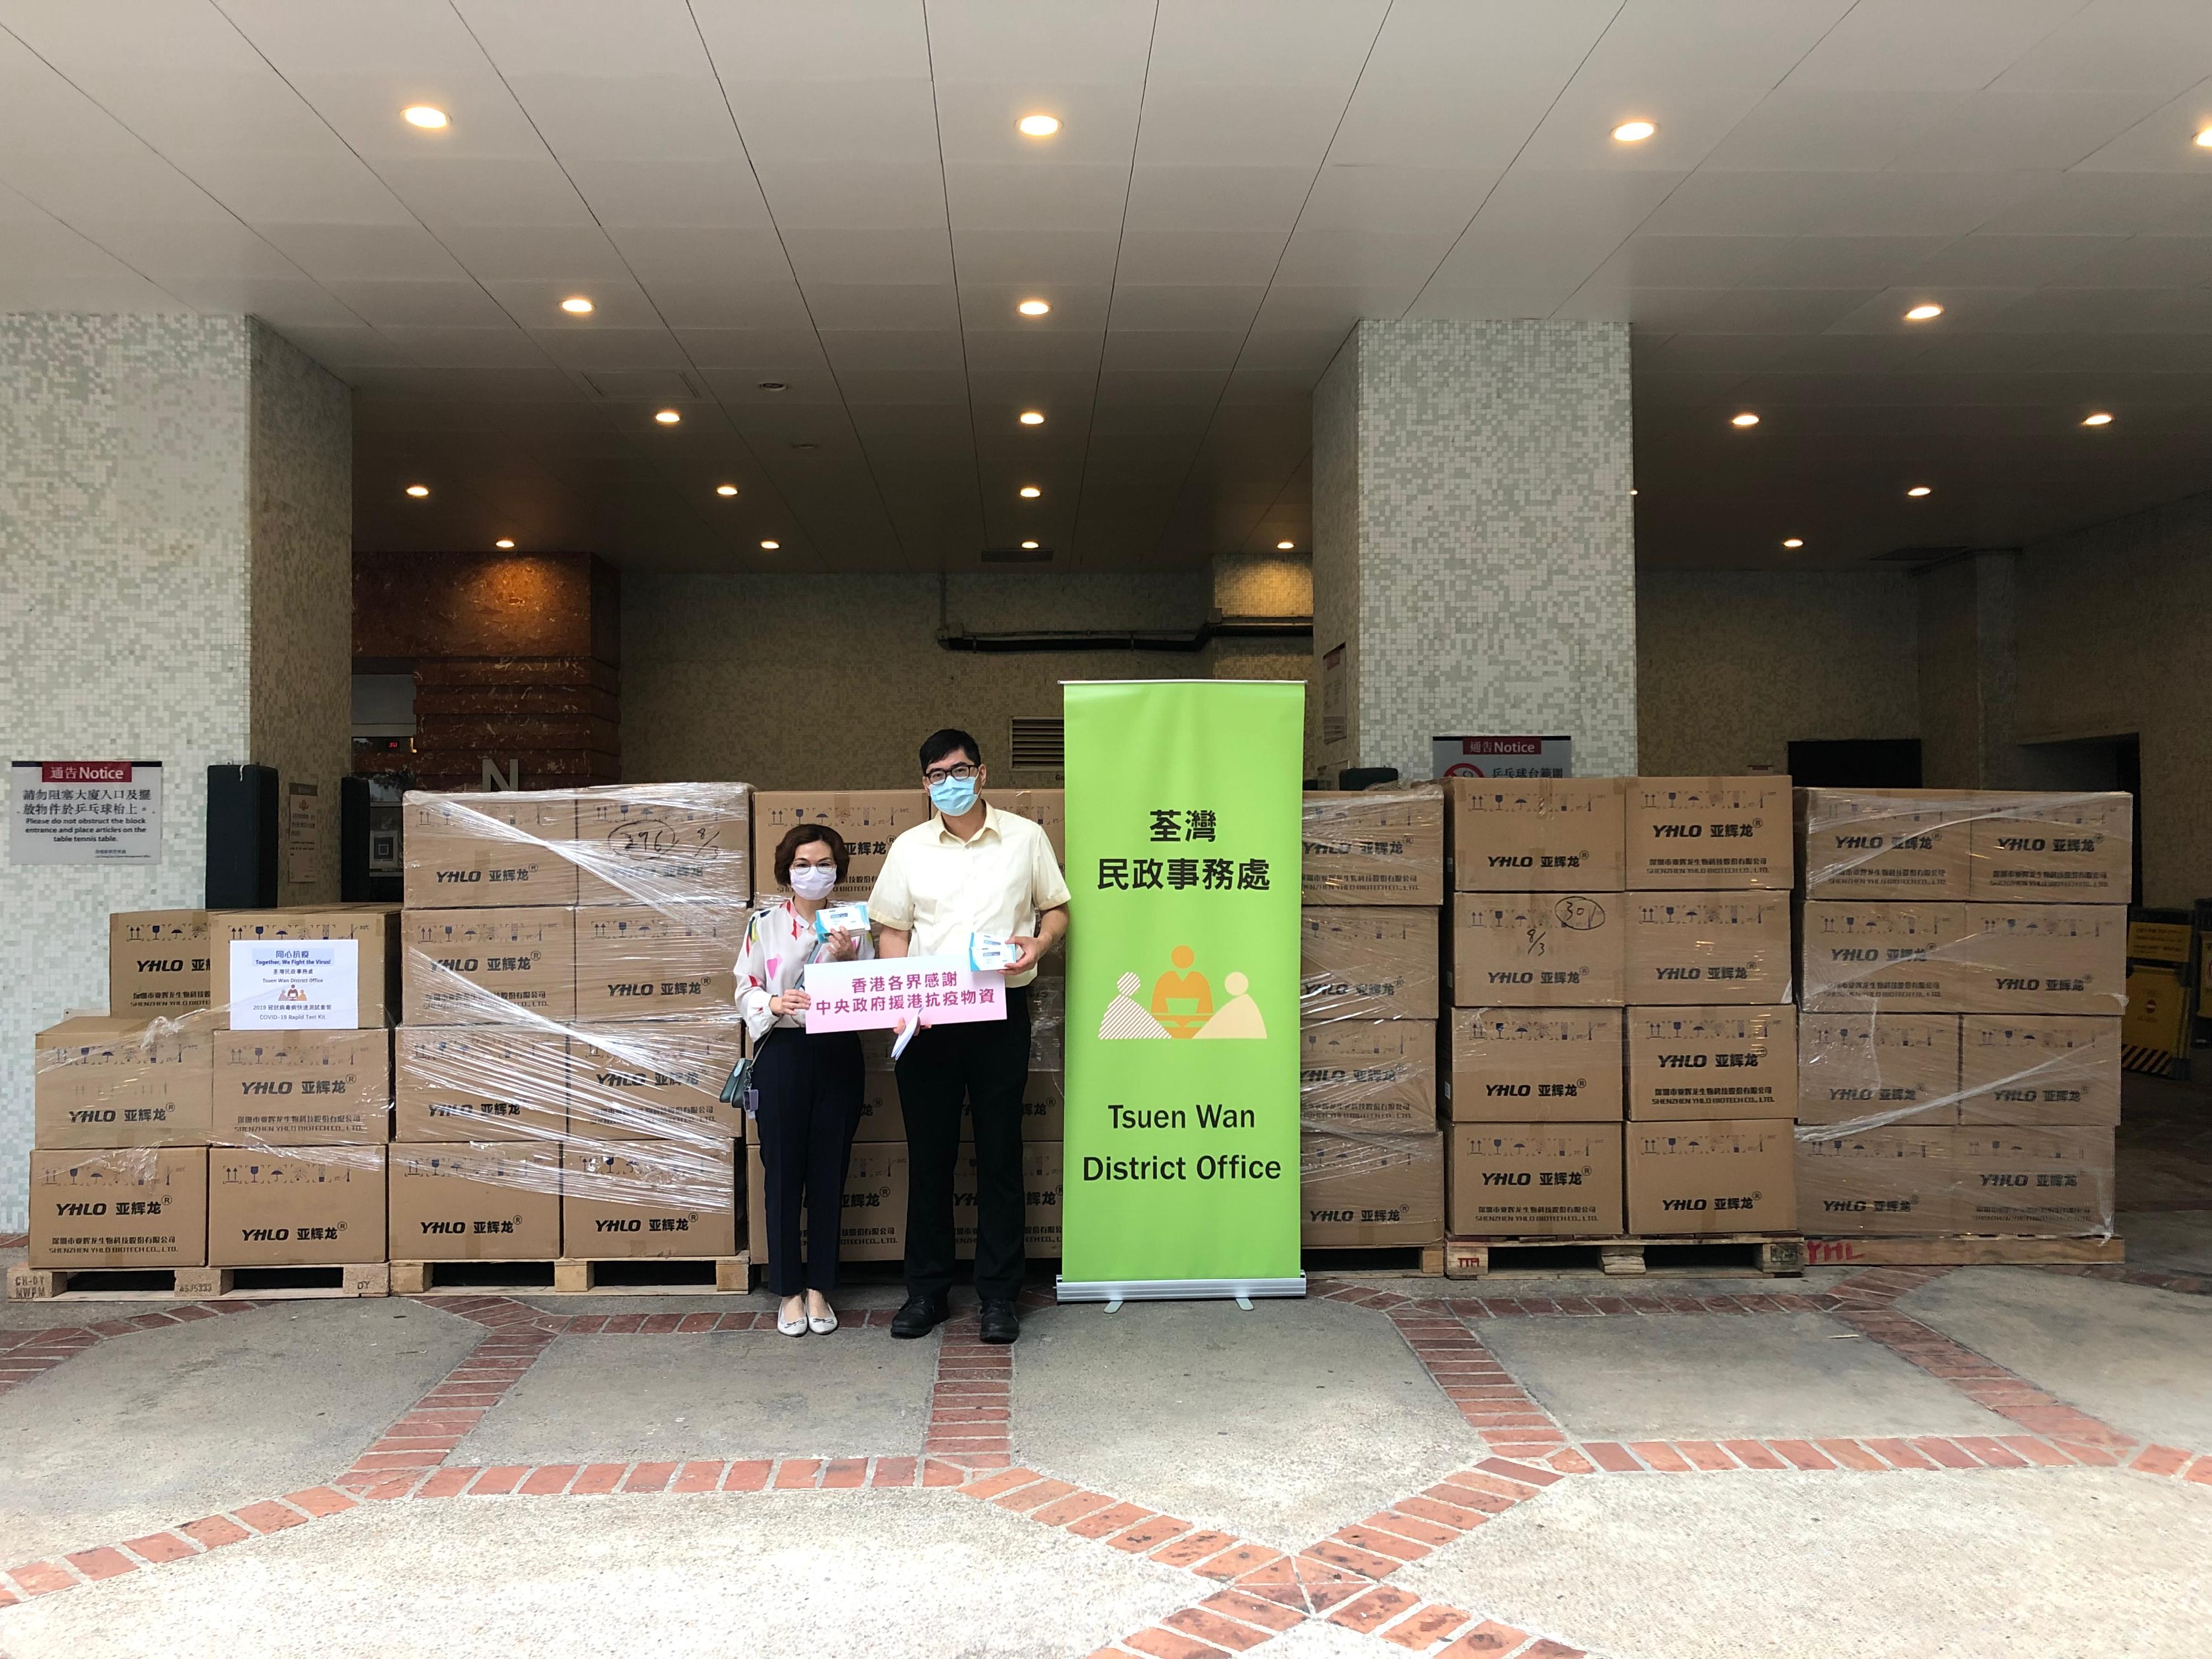 The Tsuen Wan District Office today (May 23) distributed COVID-19 rapid test kits to households, cleansing workers and property management staff living and working in Luk Yeung Sun Chuen for voluntary testing through the property management company.